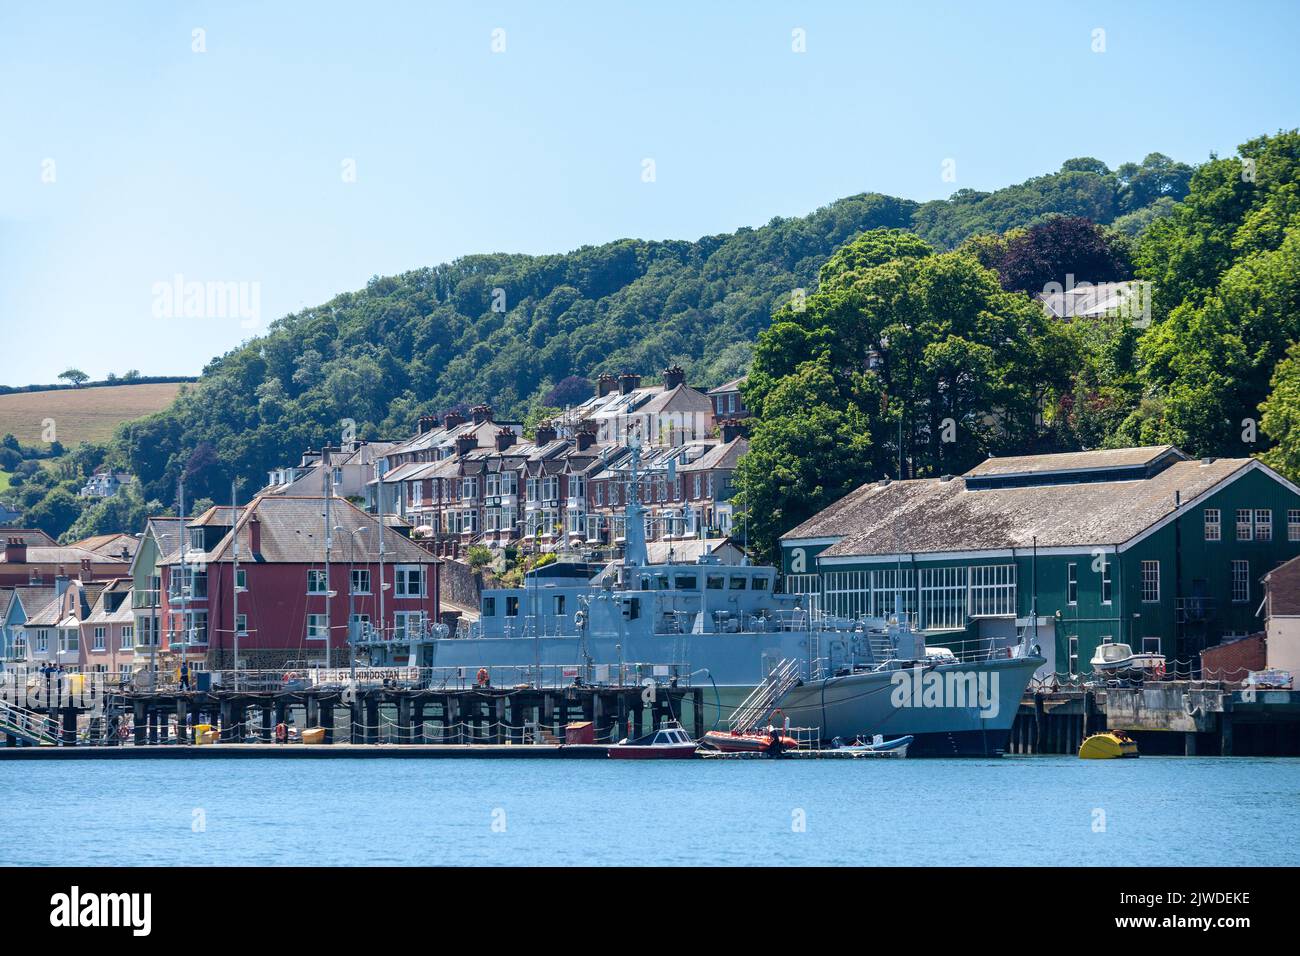 Royal navy Training ship docked on the River Dart in Dartmouth Harbour Stock Photo